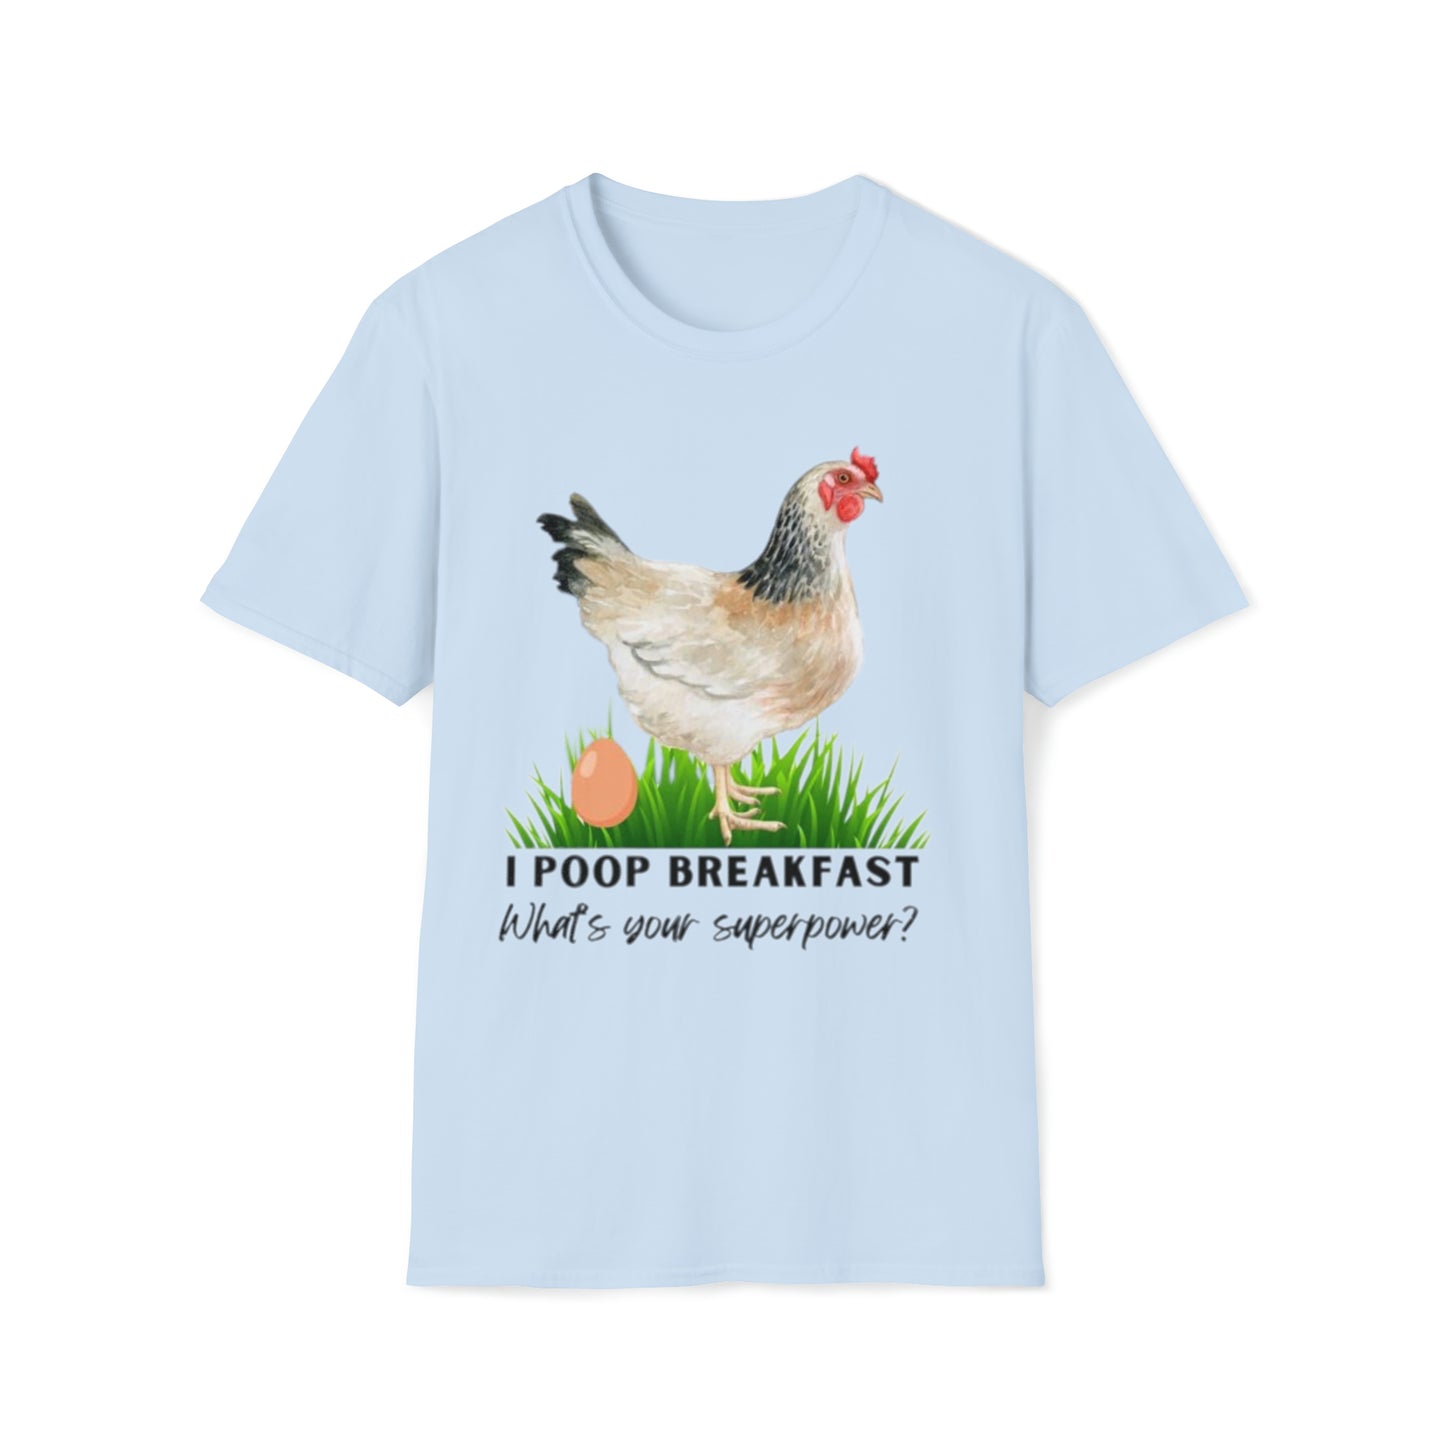 I poop breakfast, what is your superpower -  Unisex Softstyle T-Shirt